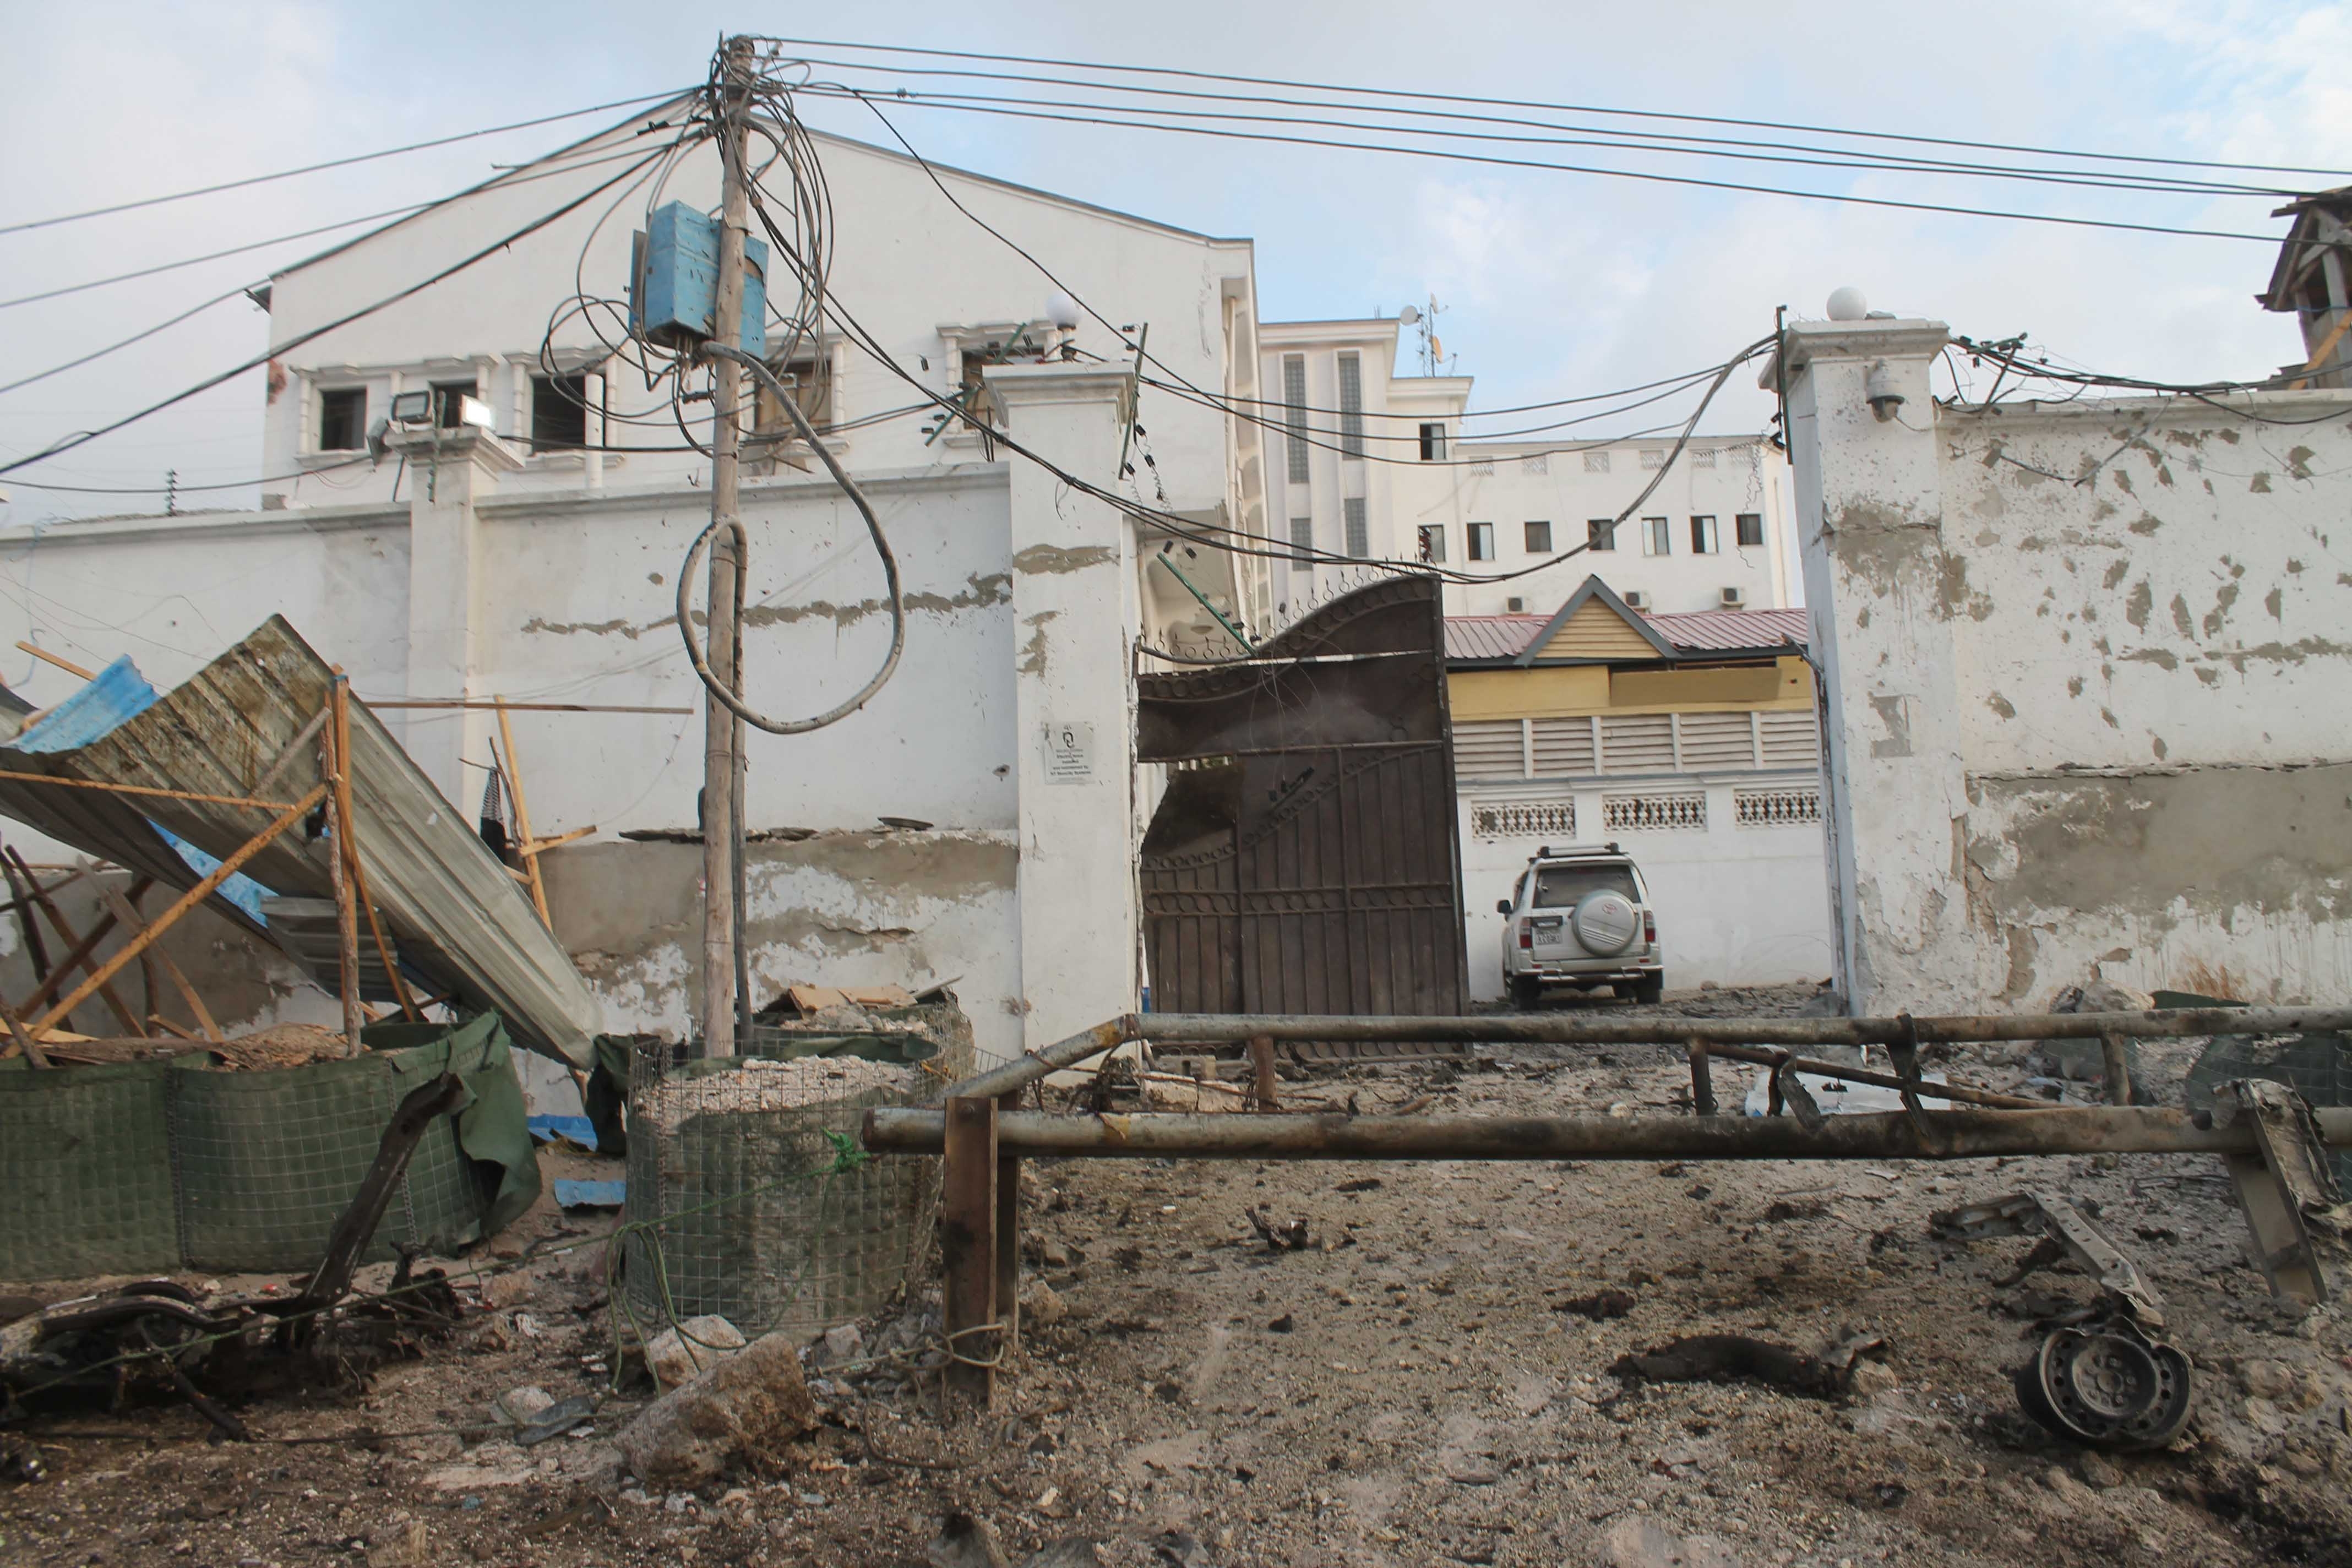 Photo shows the front gate of Maka Al-mukarama Hotel after an explosion in Mogadishu, capital of Somalia, on March 27, 2015. At least five people were killed and scores injured in a suicide car explosion in Somali capital Mogadishu